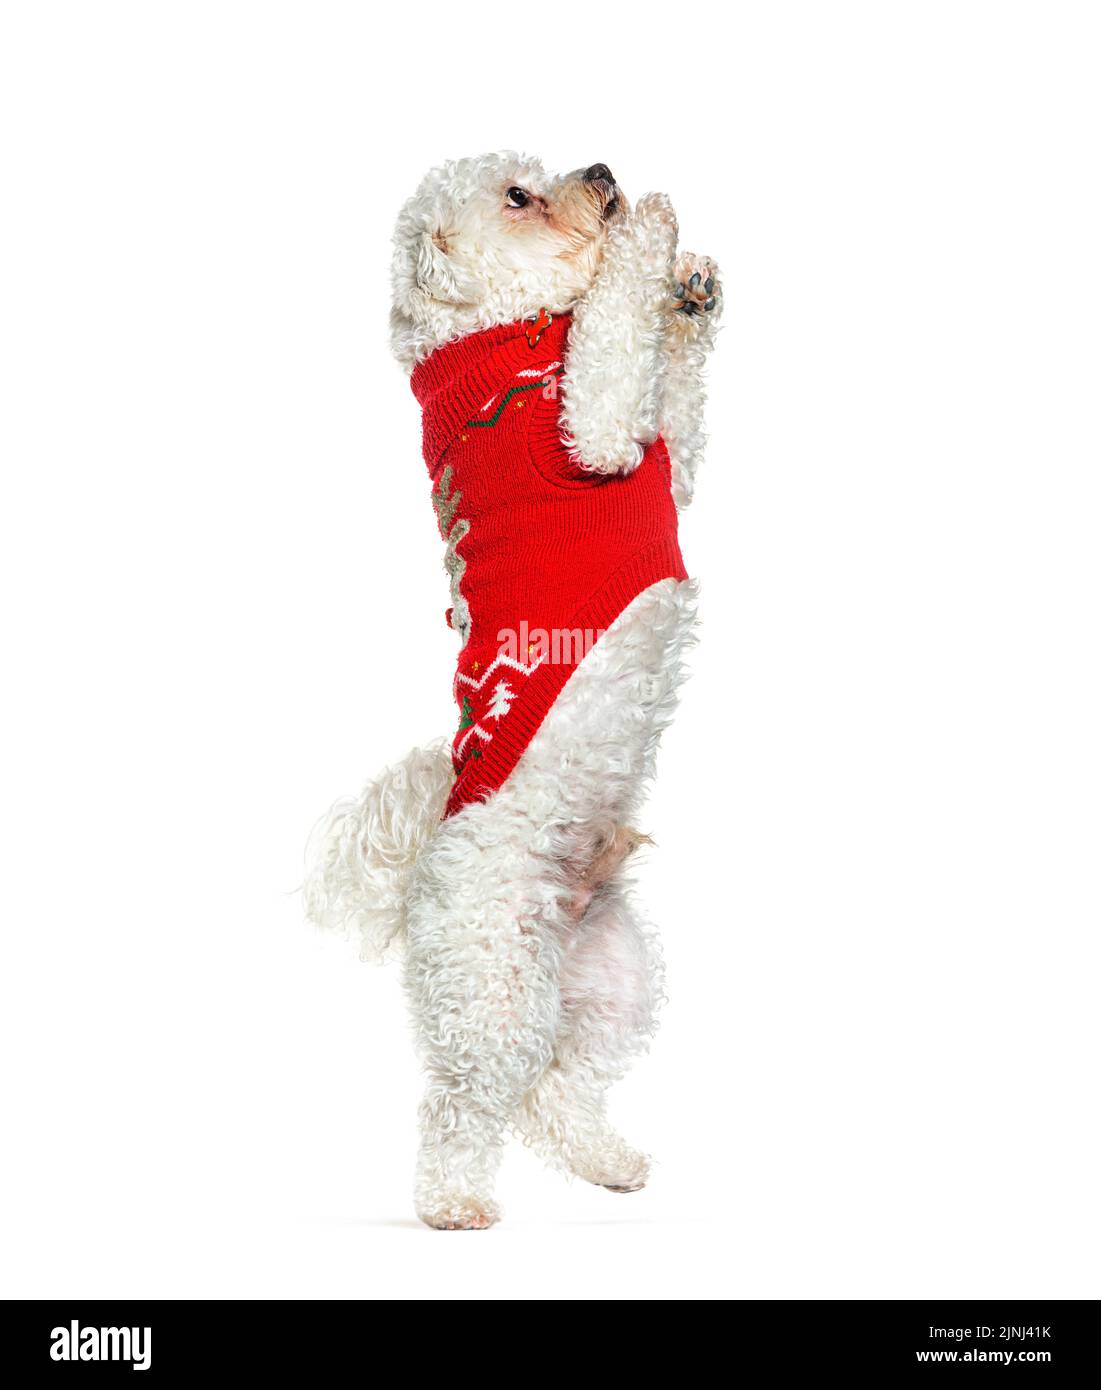 Bichon Frise begging on hind legs wearing a red woollen coat, isolated on white Stock Photo